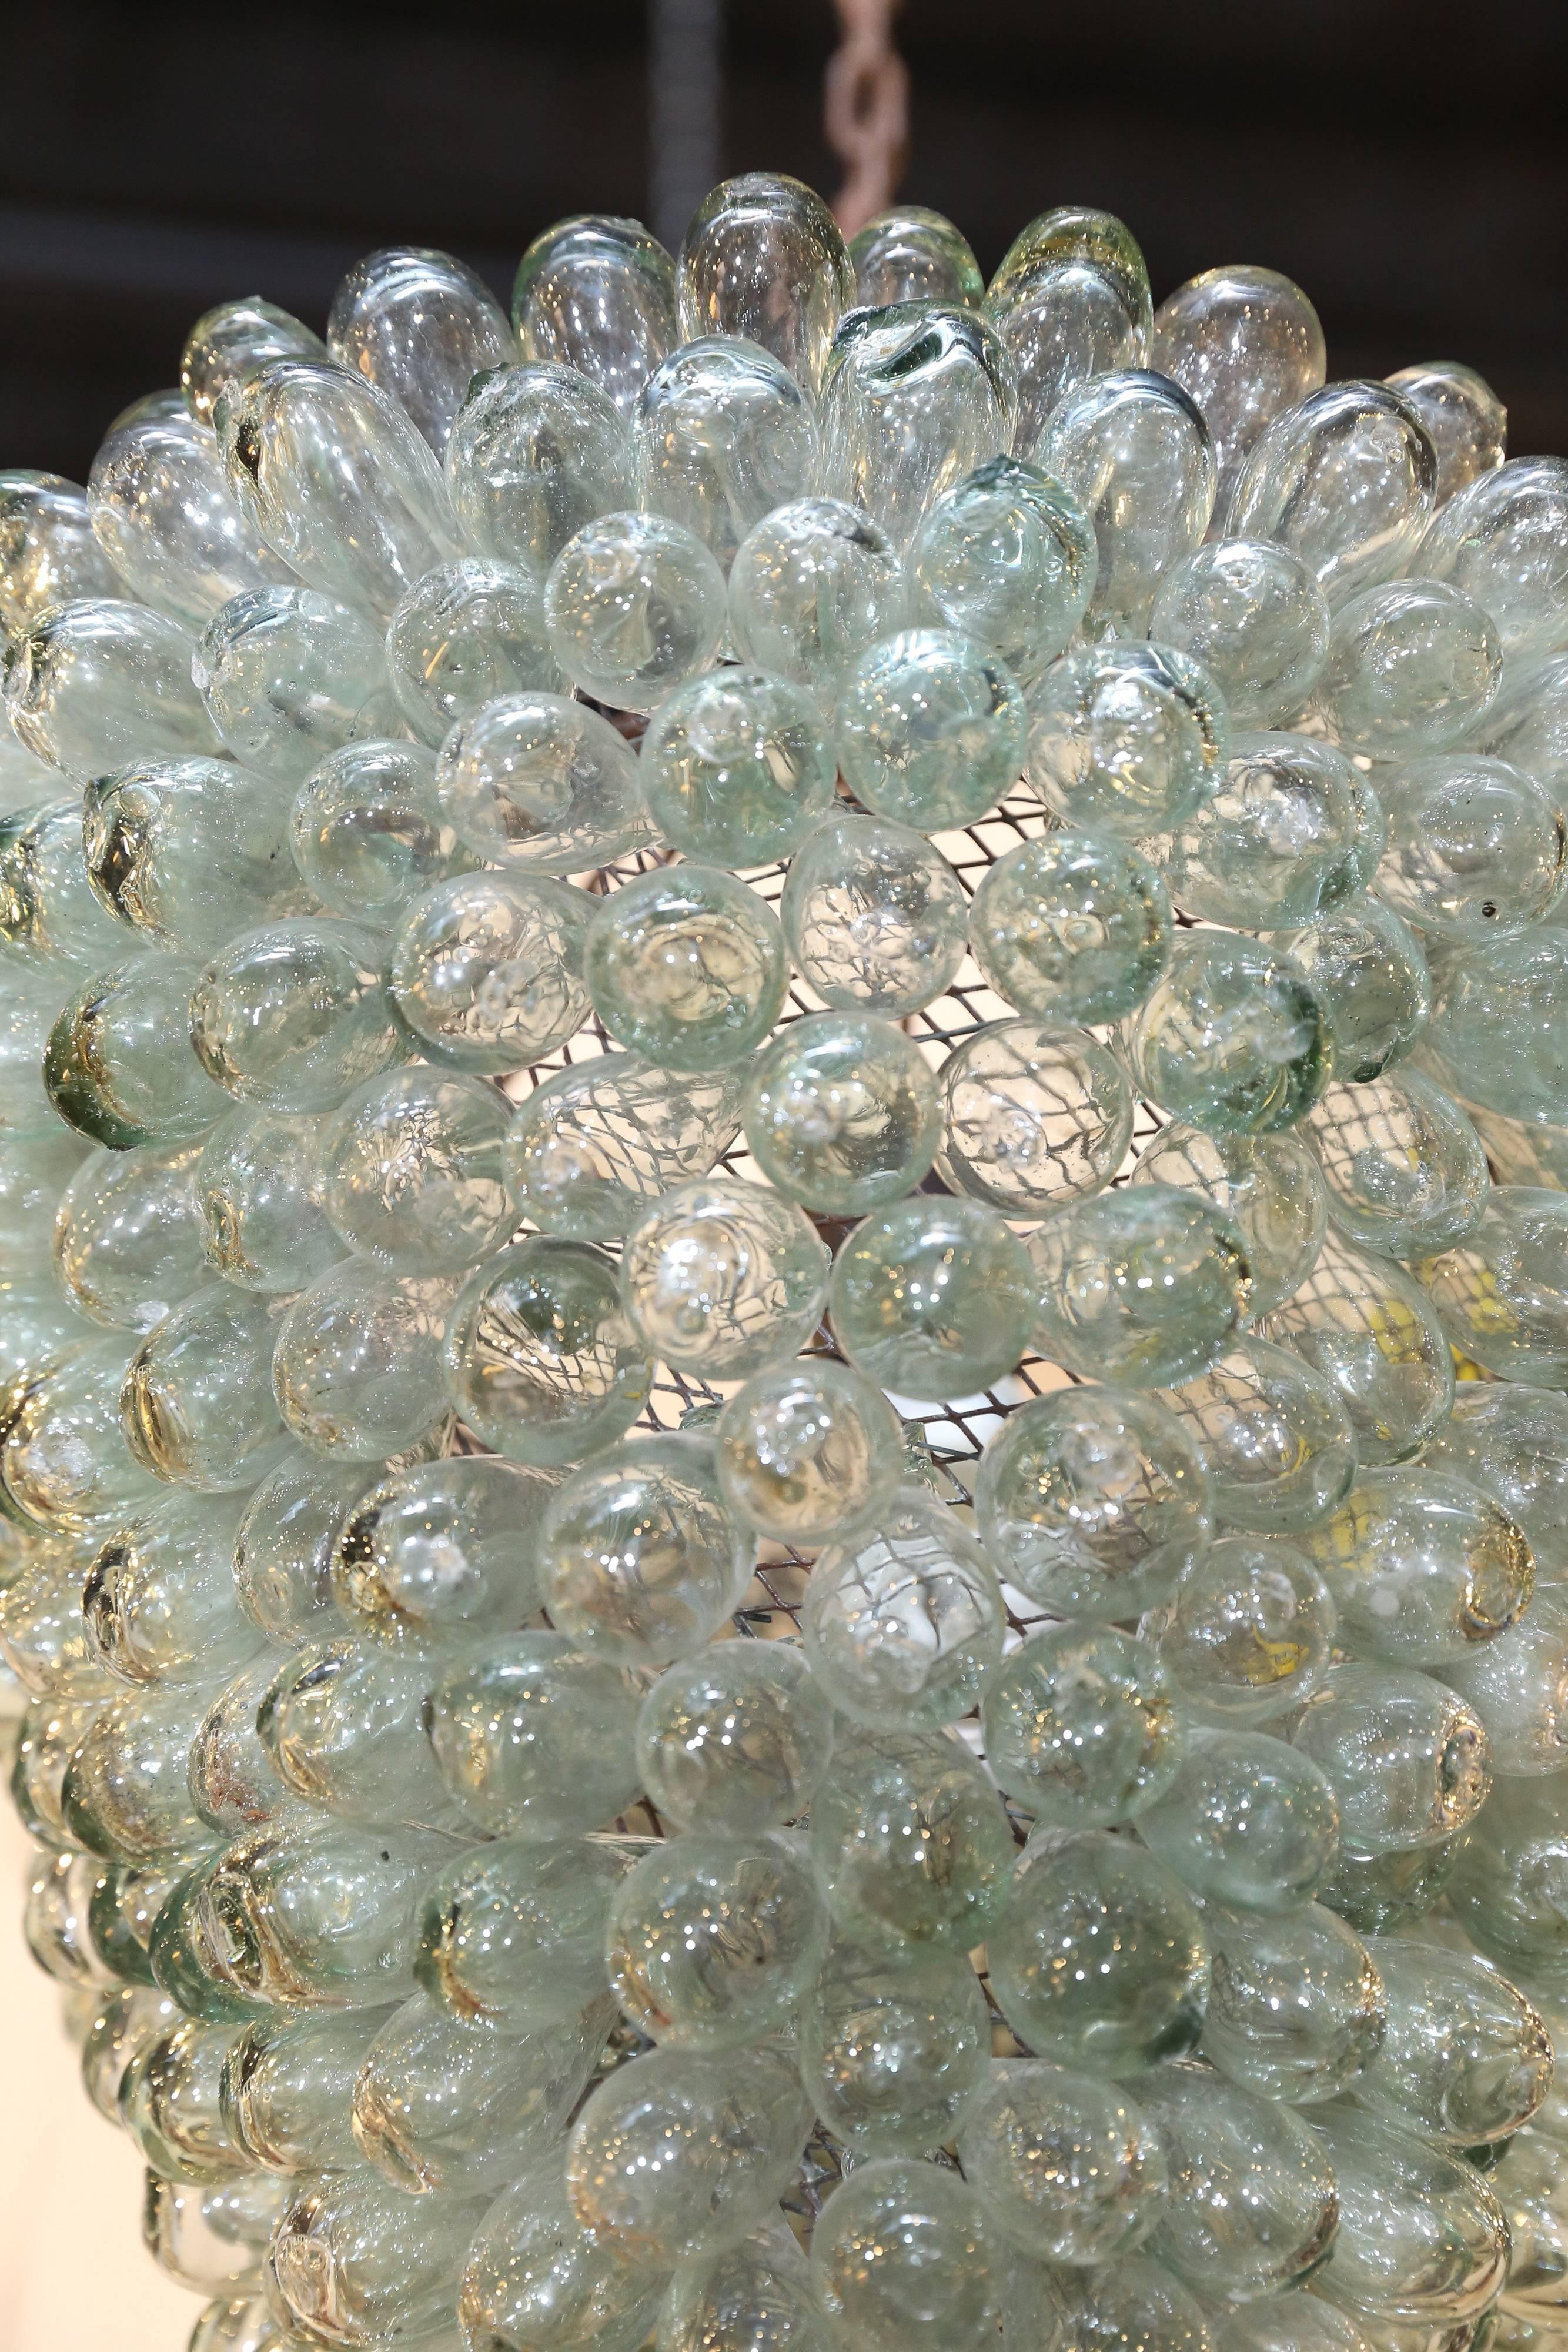 Dozens and dozens of pale green blown glass bubbles, each approximately 1.5 inches in diameter, cluster together to form an enchanting heavenly object that adapts itself to a myriad of styles. With each bubble individually attached to a sturdy mesh